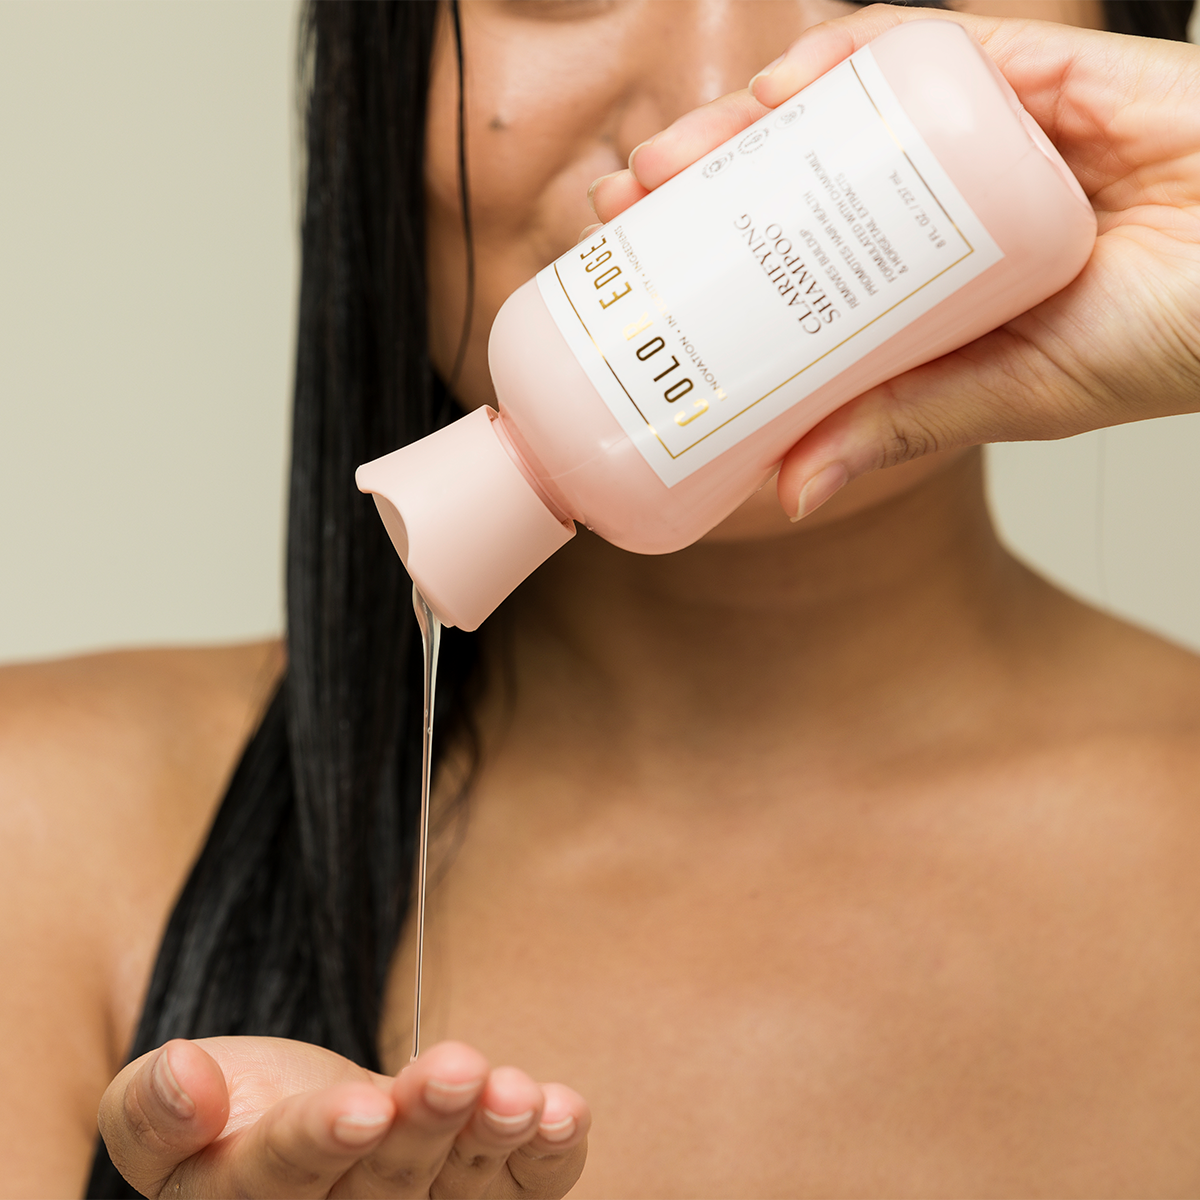 Model squeezing Clarifying Shampoo in hand